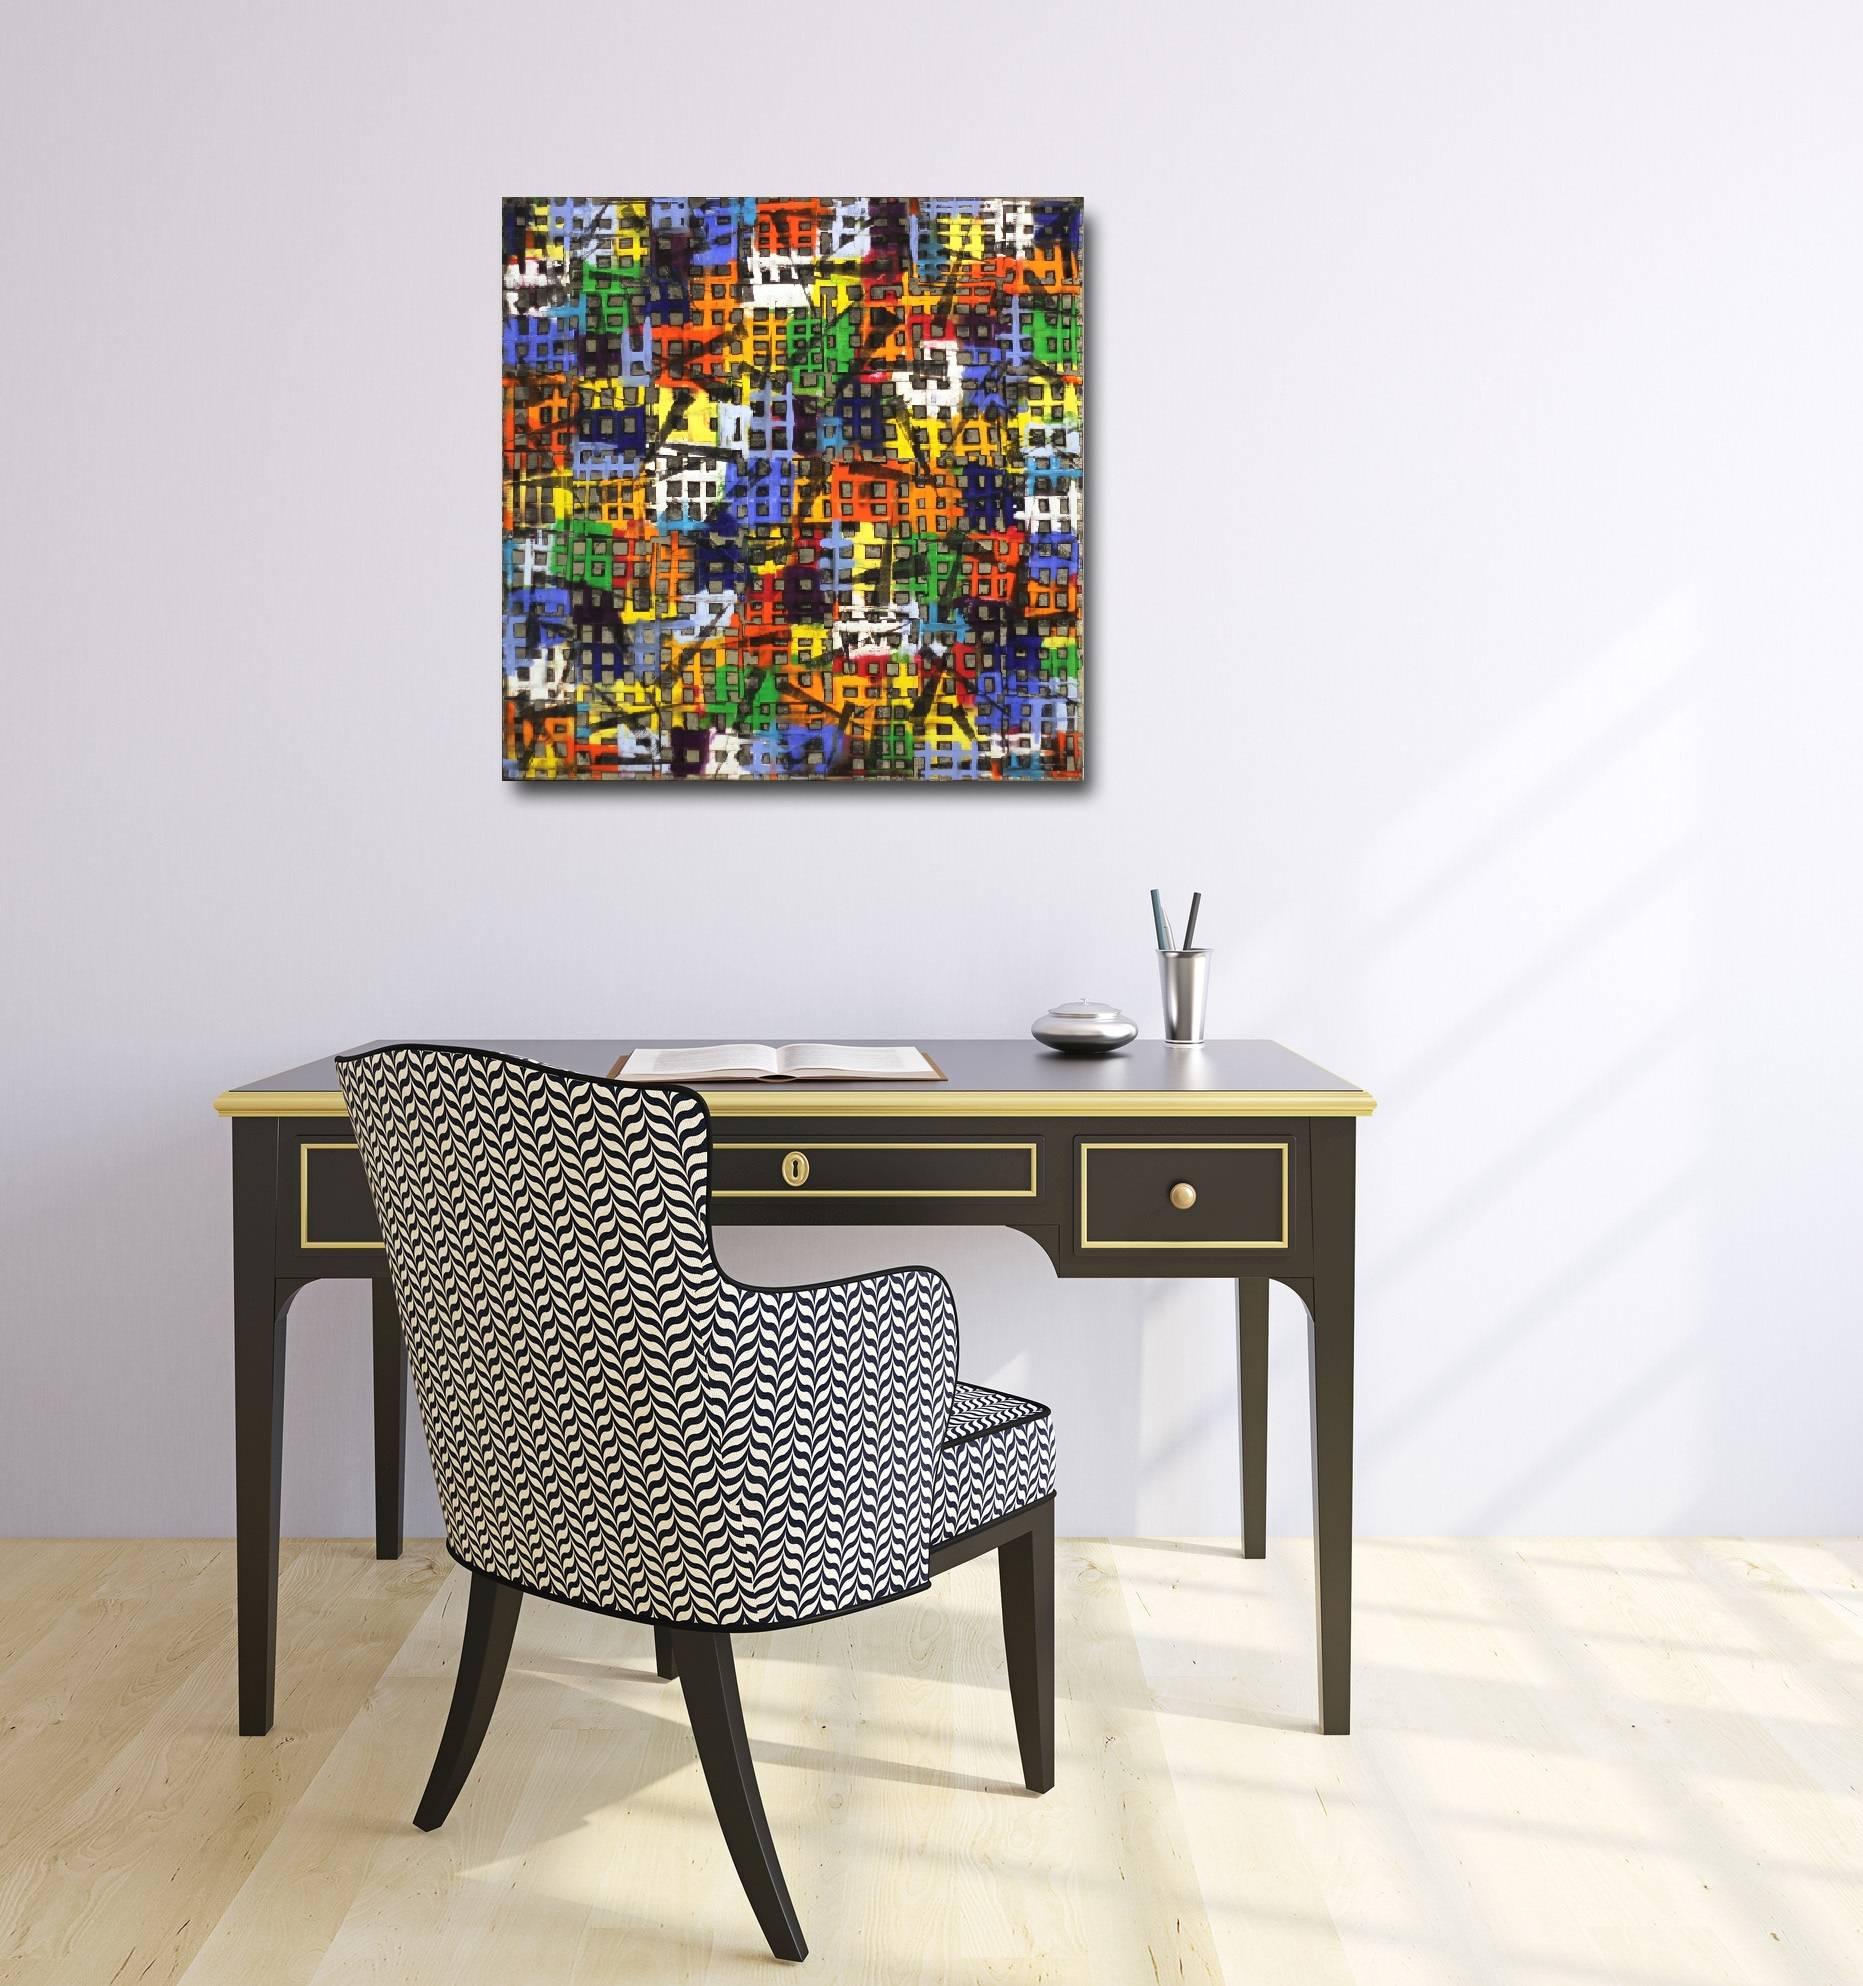 Color Block 15-12 - Original Colorful Oil Painting Geometric Pattern Texture - Black Abstract Painting by Petra Rös-Nickel